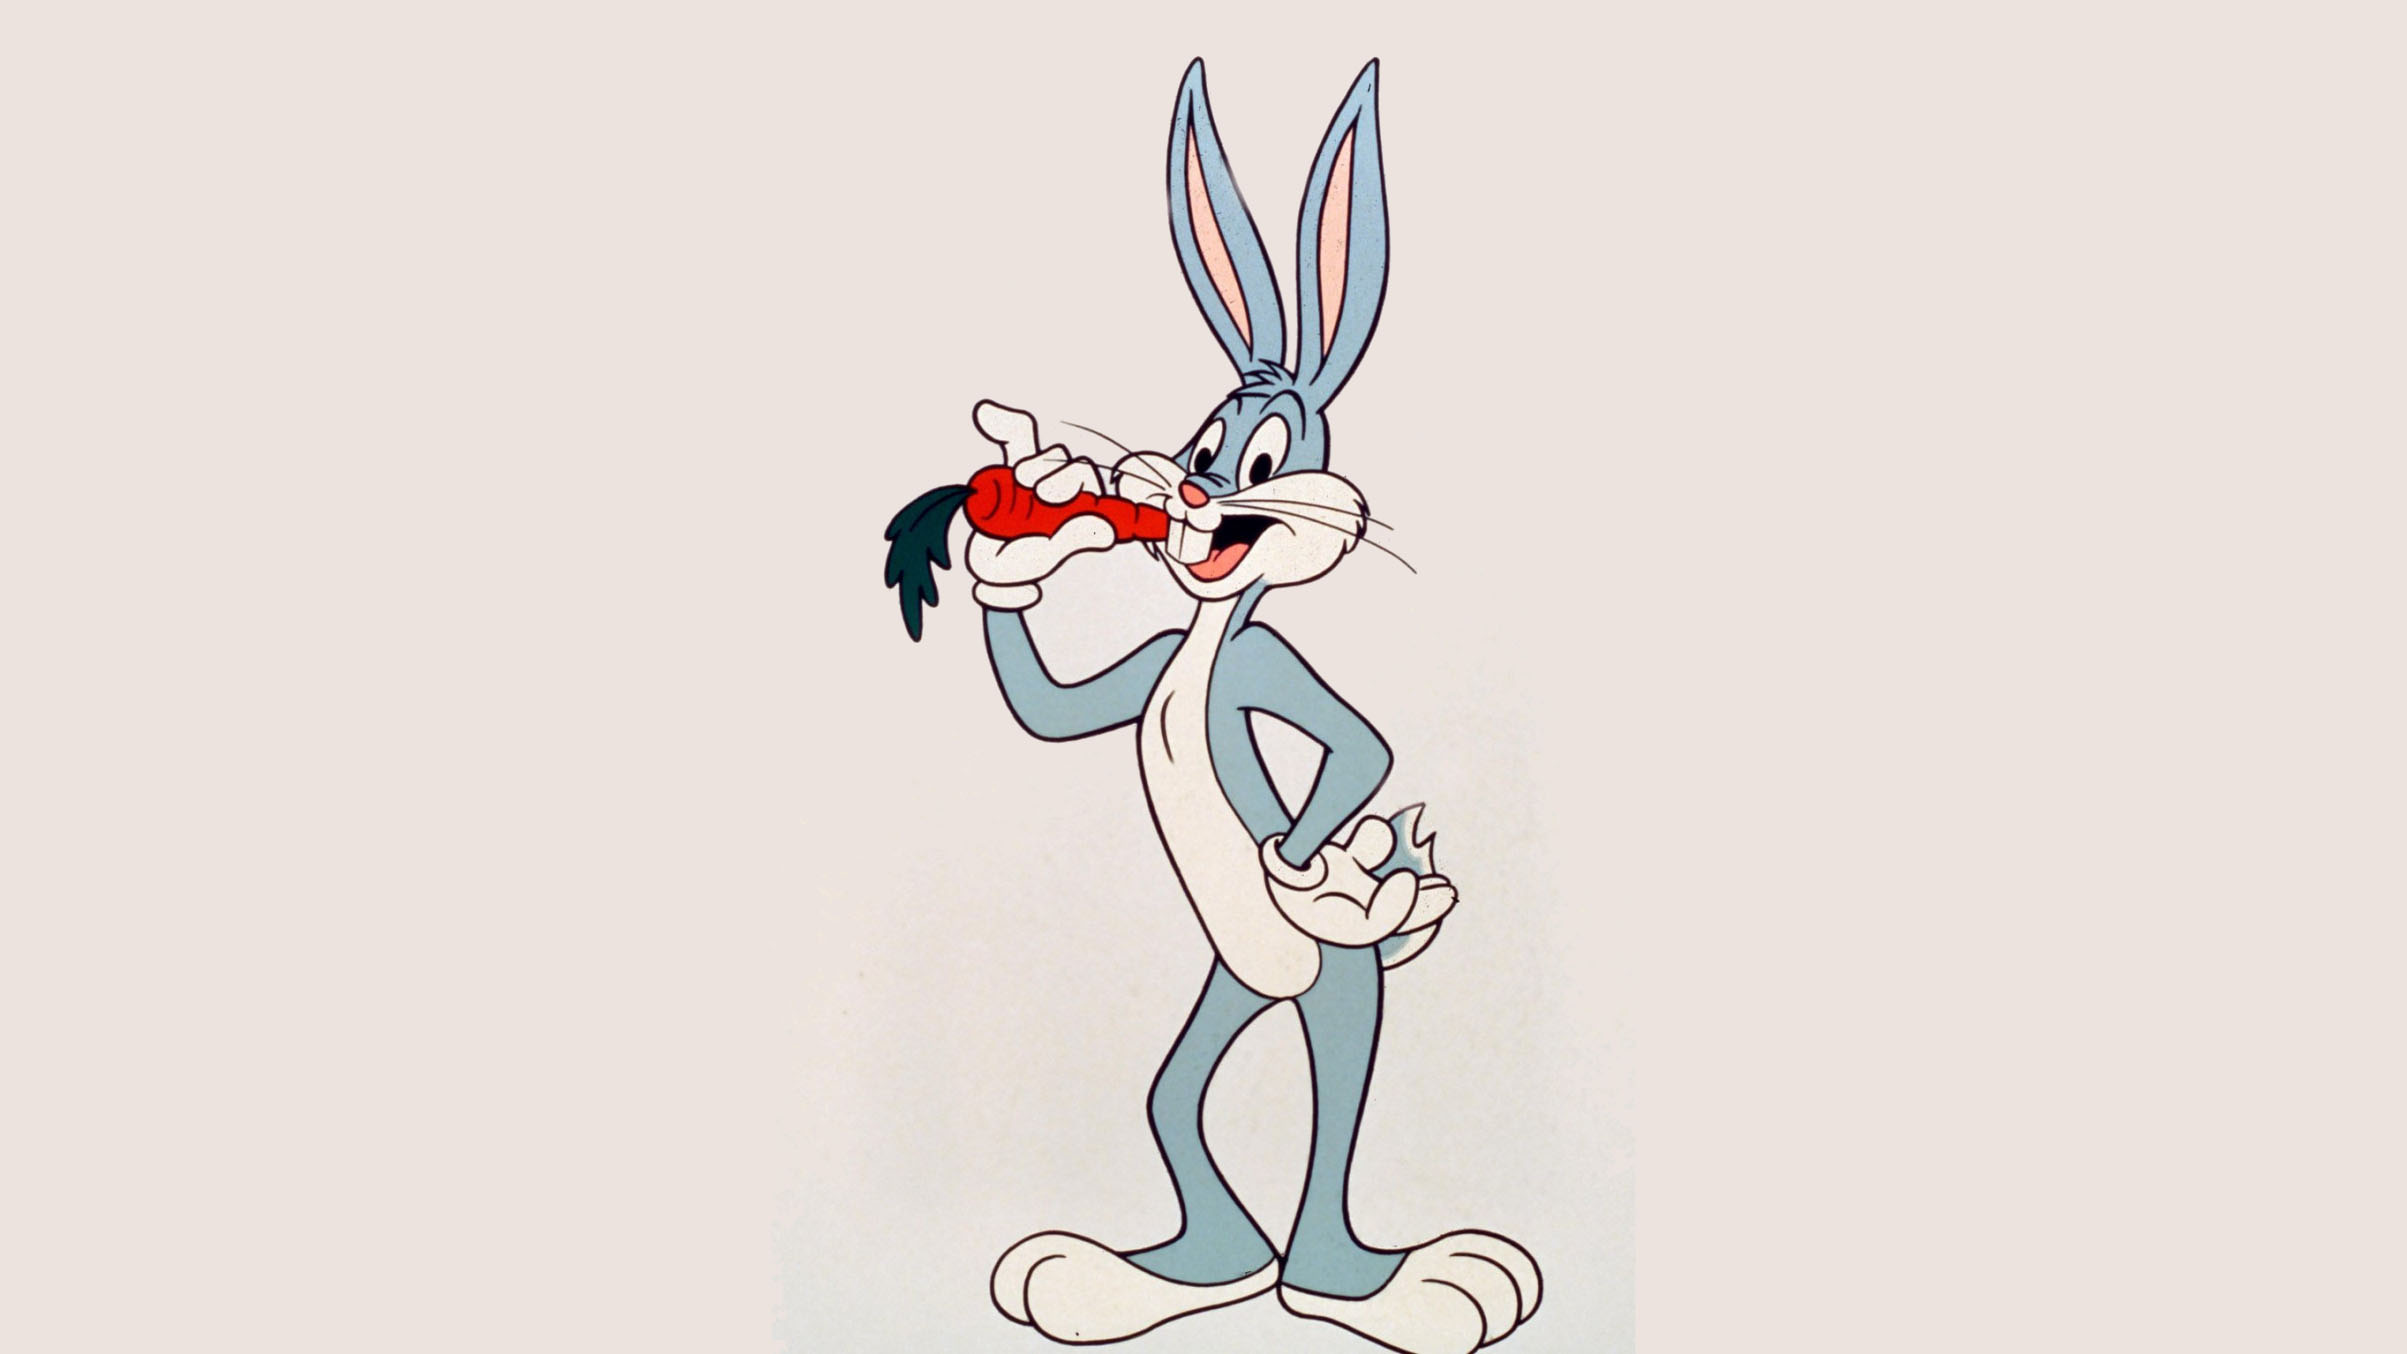 Brilliant cartoon characters that are cooler than you